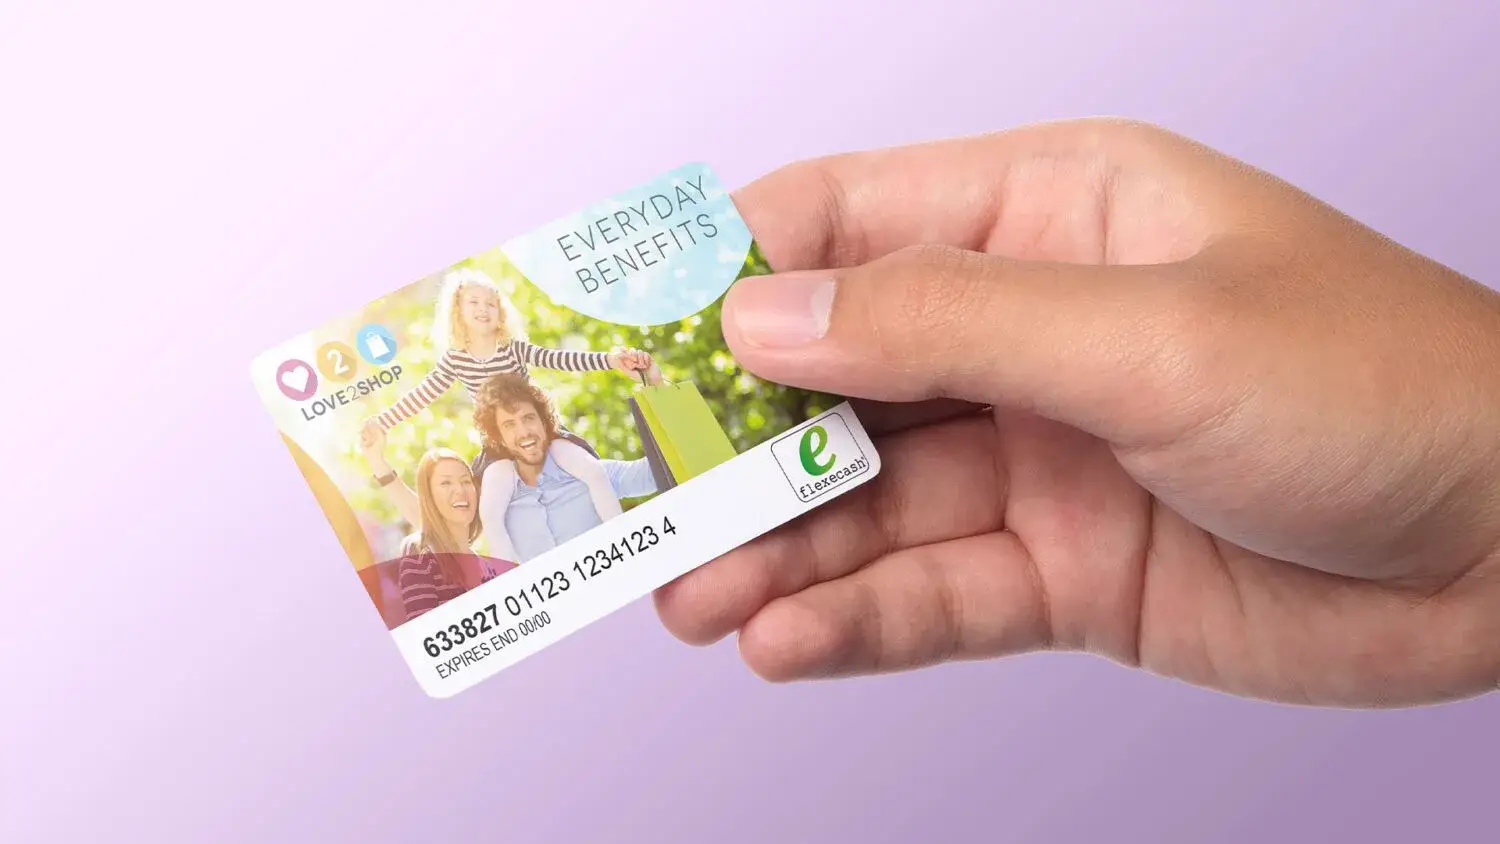 Everyday Benefits Card from Love2shop